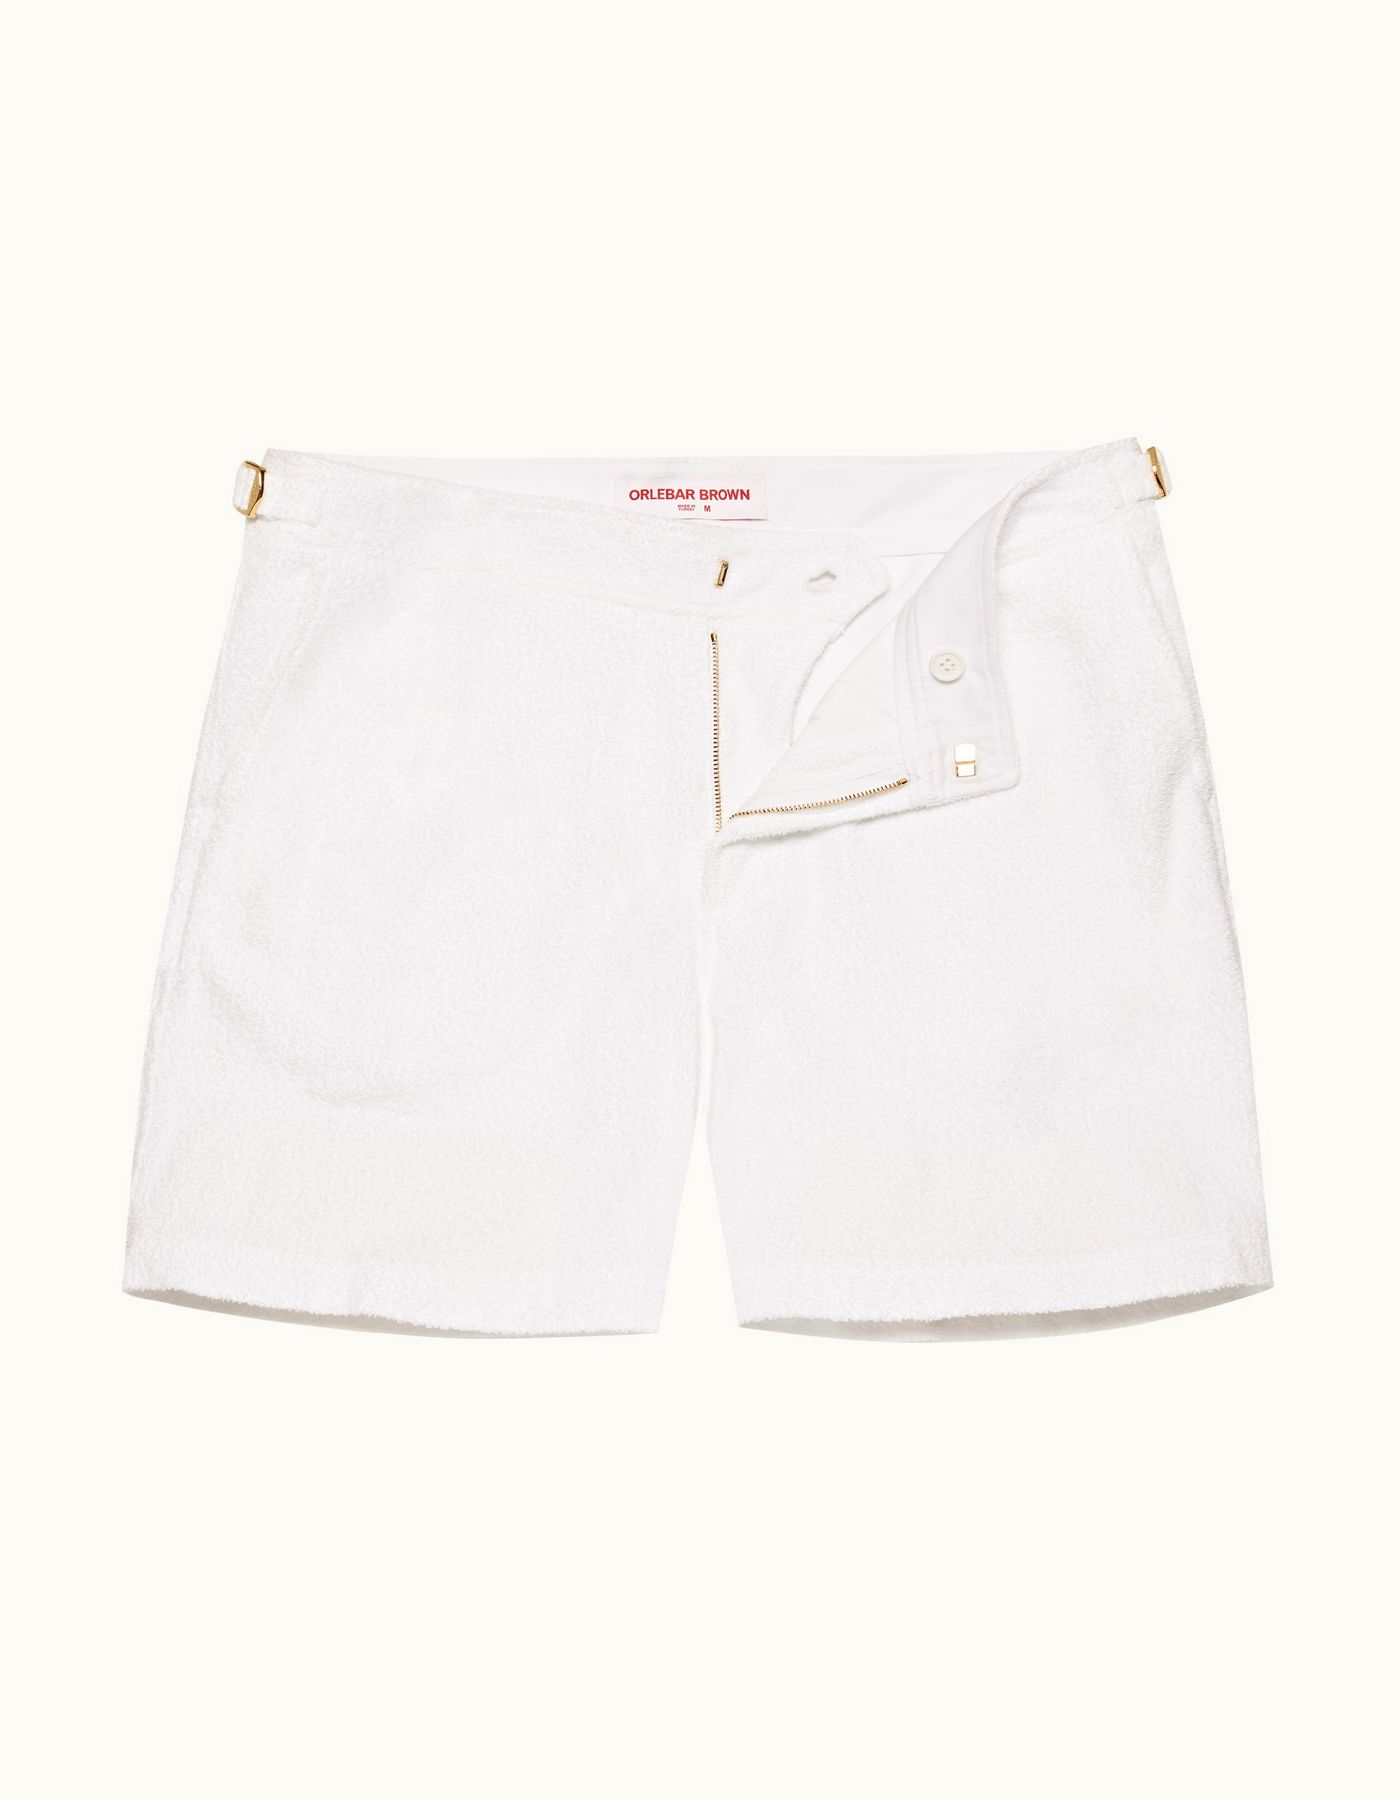 Bulldog Towelling - Mens White Mid-Length Double-Faced Towelling Shorts